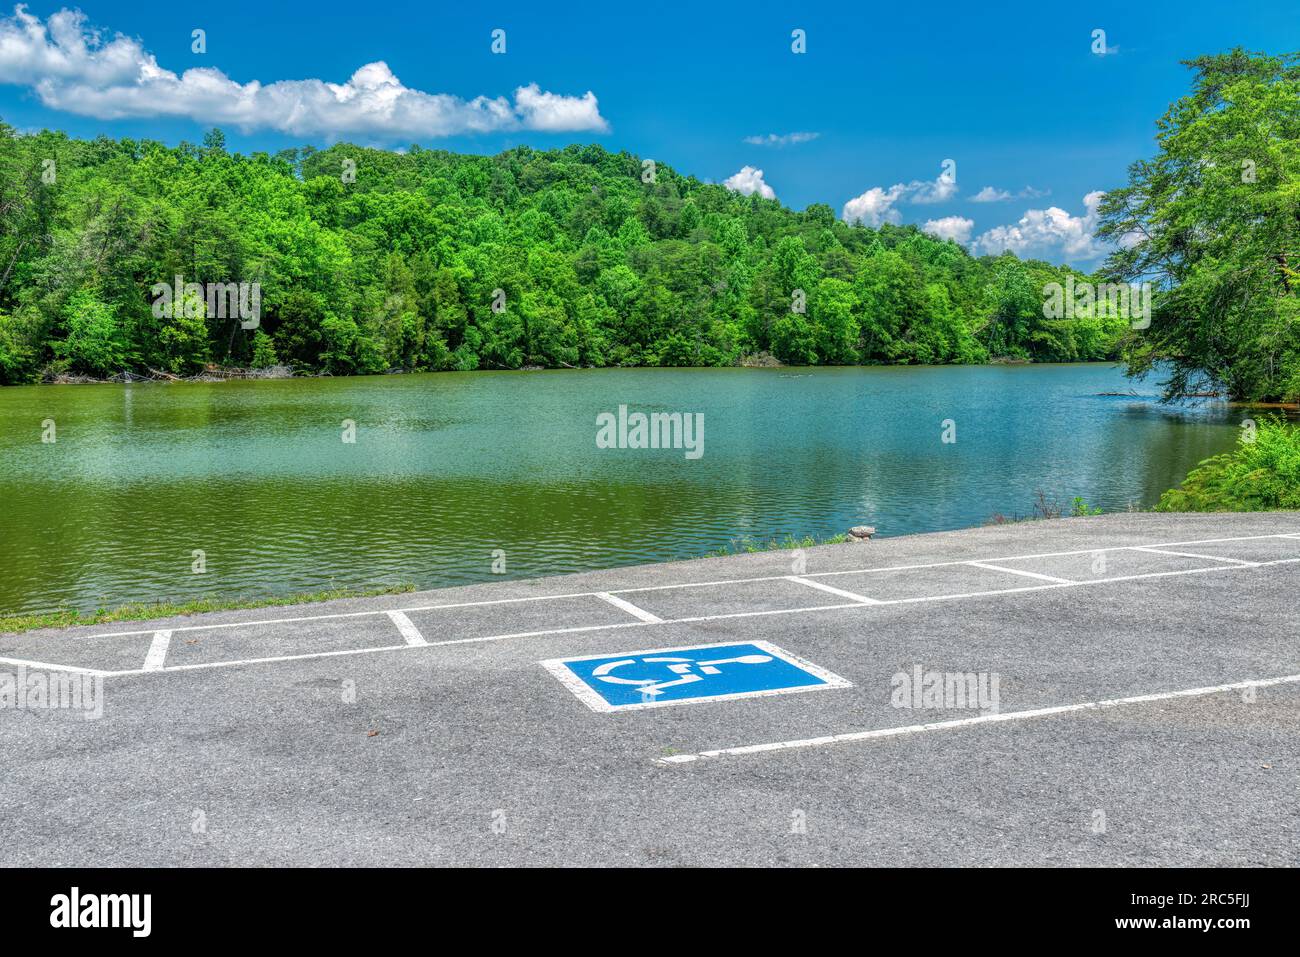 Horizontal shot of a handicap parking space next to the Tennessee River in summertime. Stock Photo